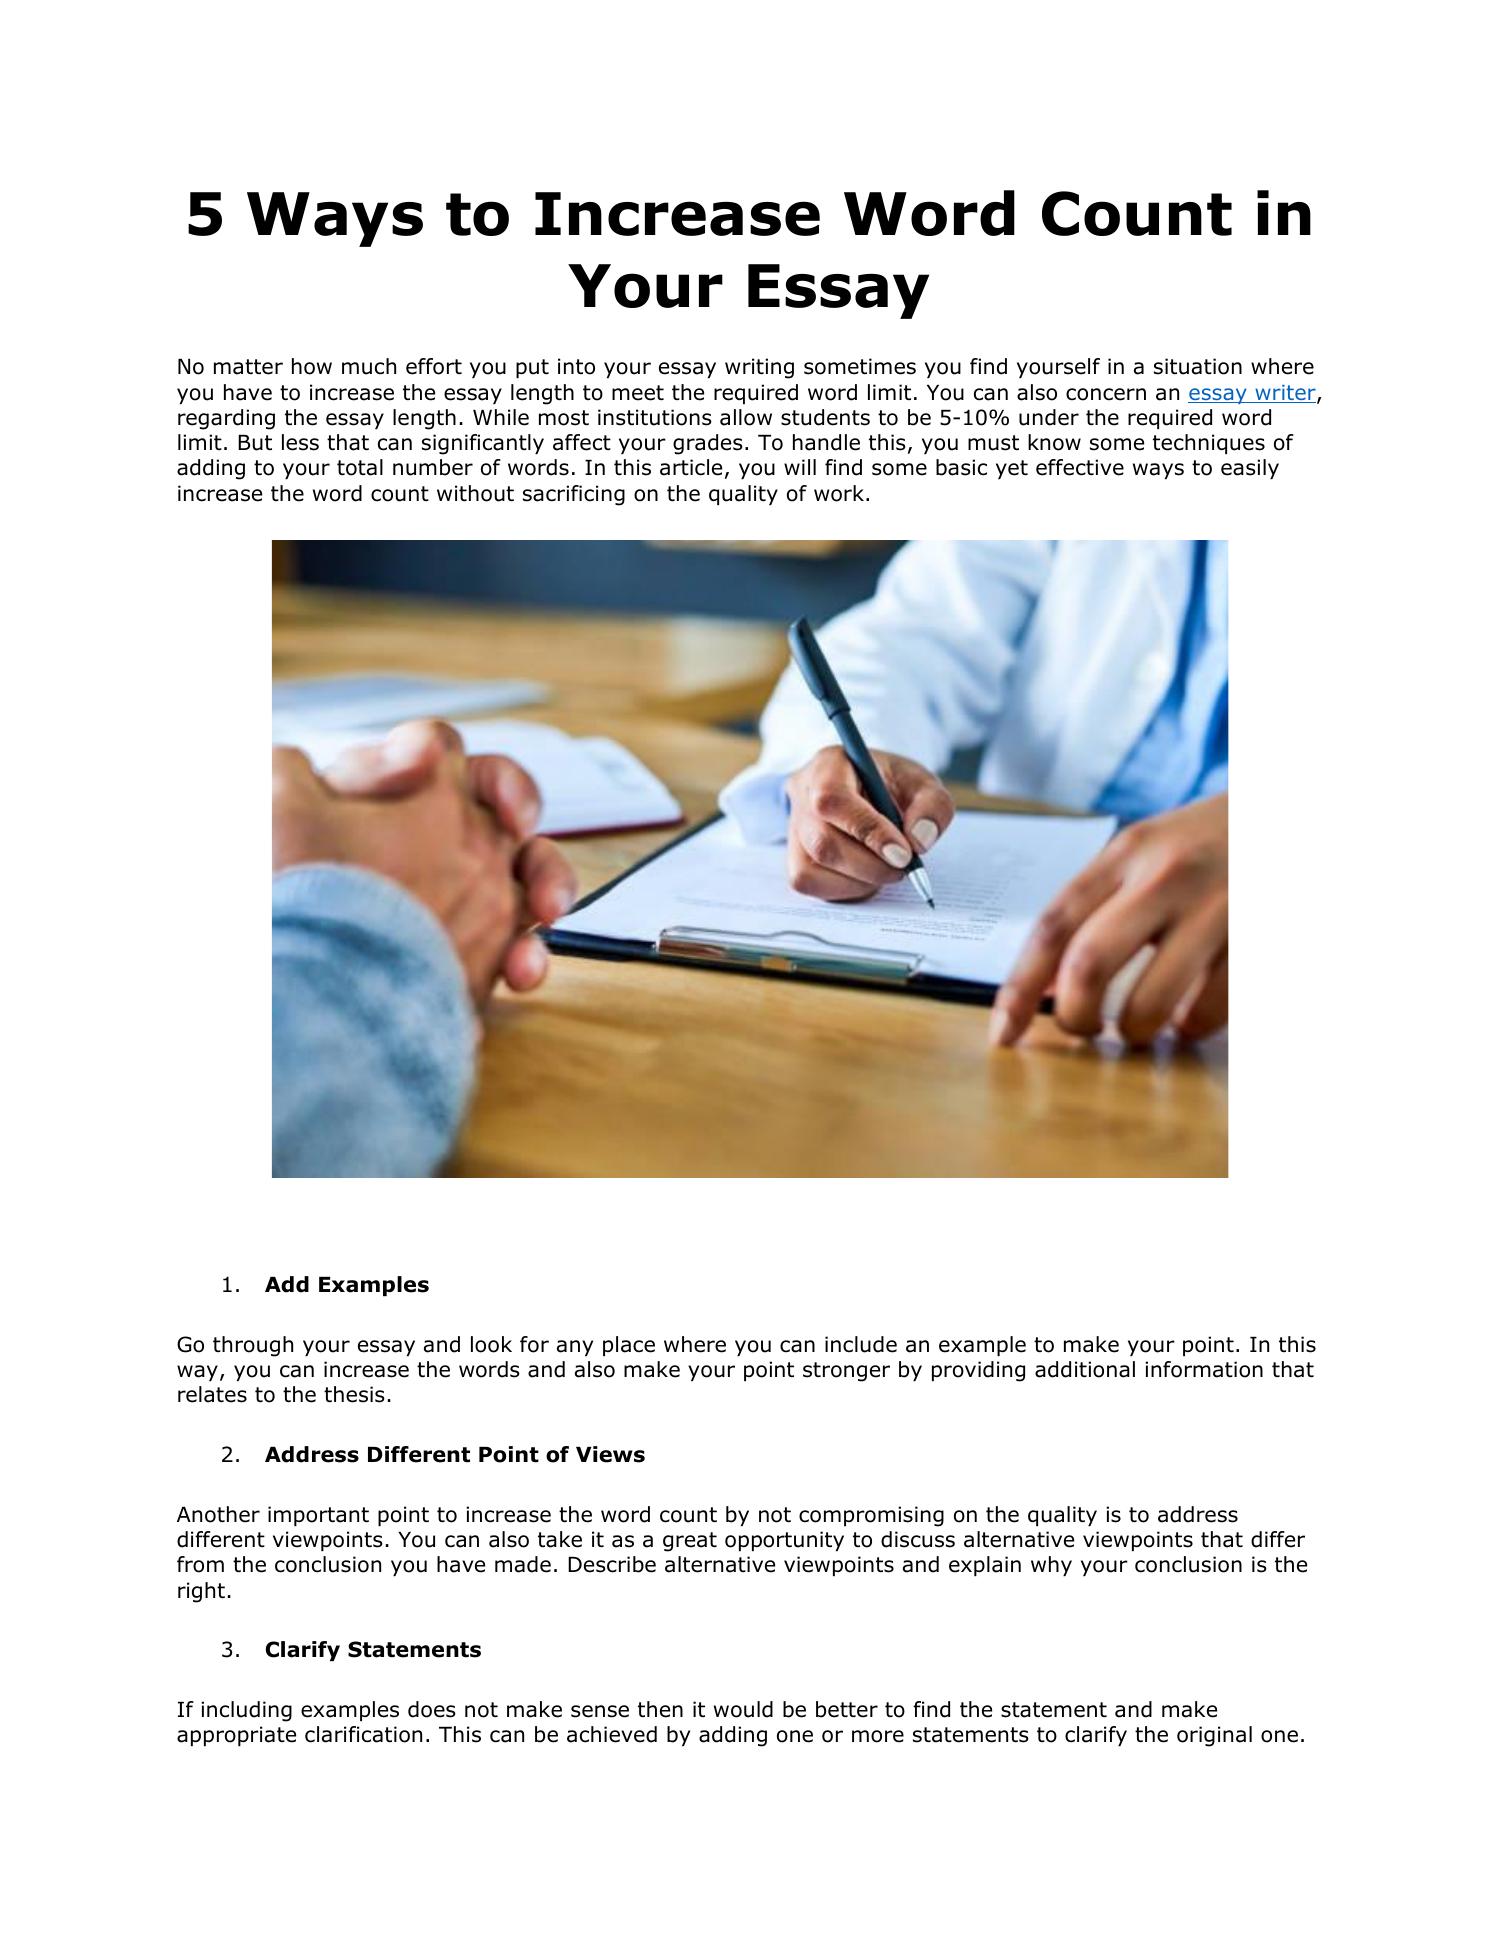 how to increase word count essay